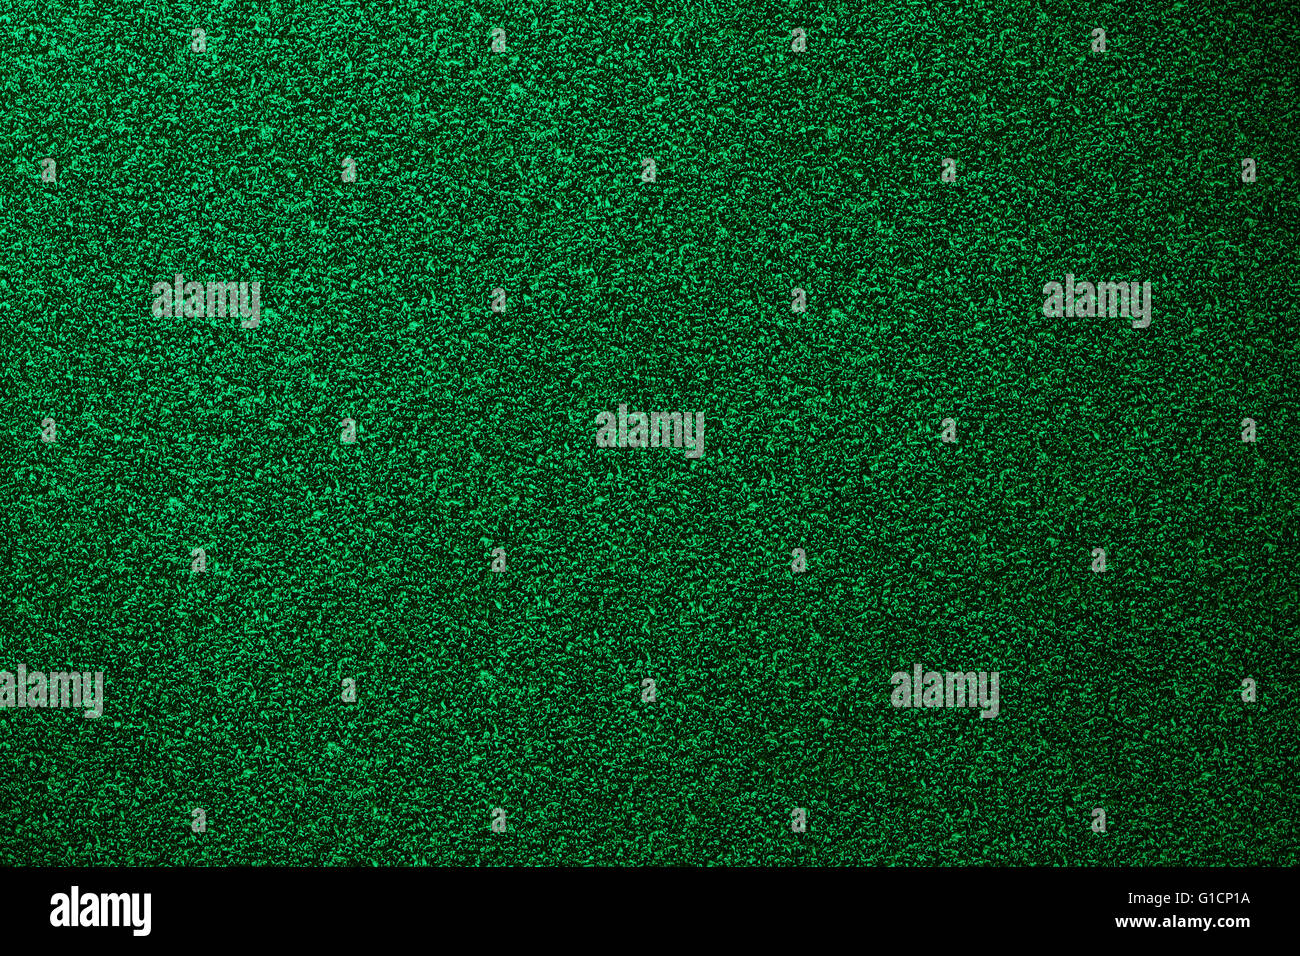 green abstract background or grain pattern texture Stock Photo